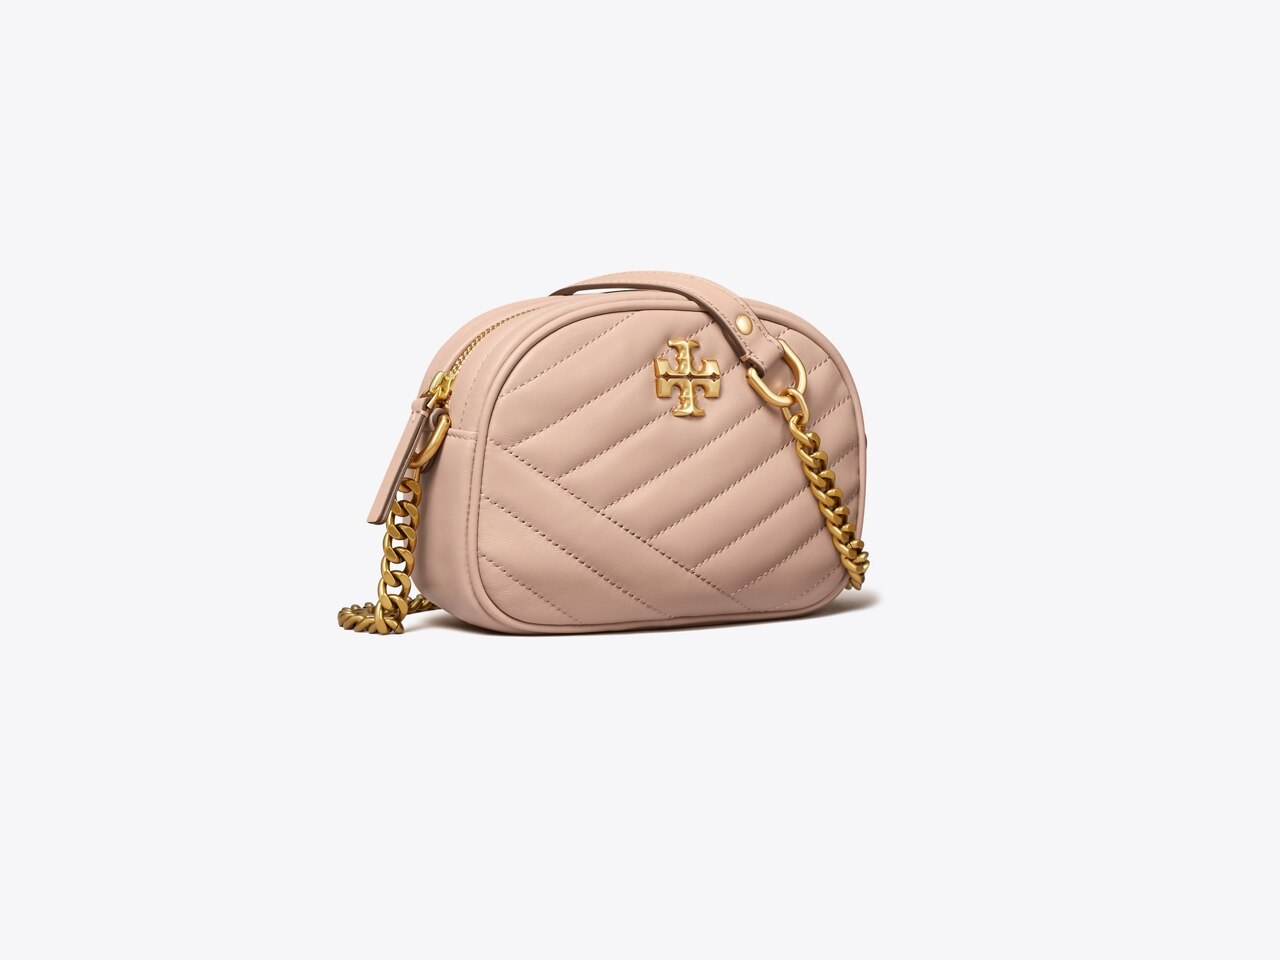 TORY BURCH KIRA CHEVRON SMALL CAMERA BAG, PINK MOON 💕Zipper closure  💕Adjustable metal chain strap with leather shoulder guard for…